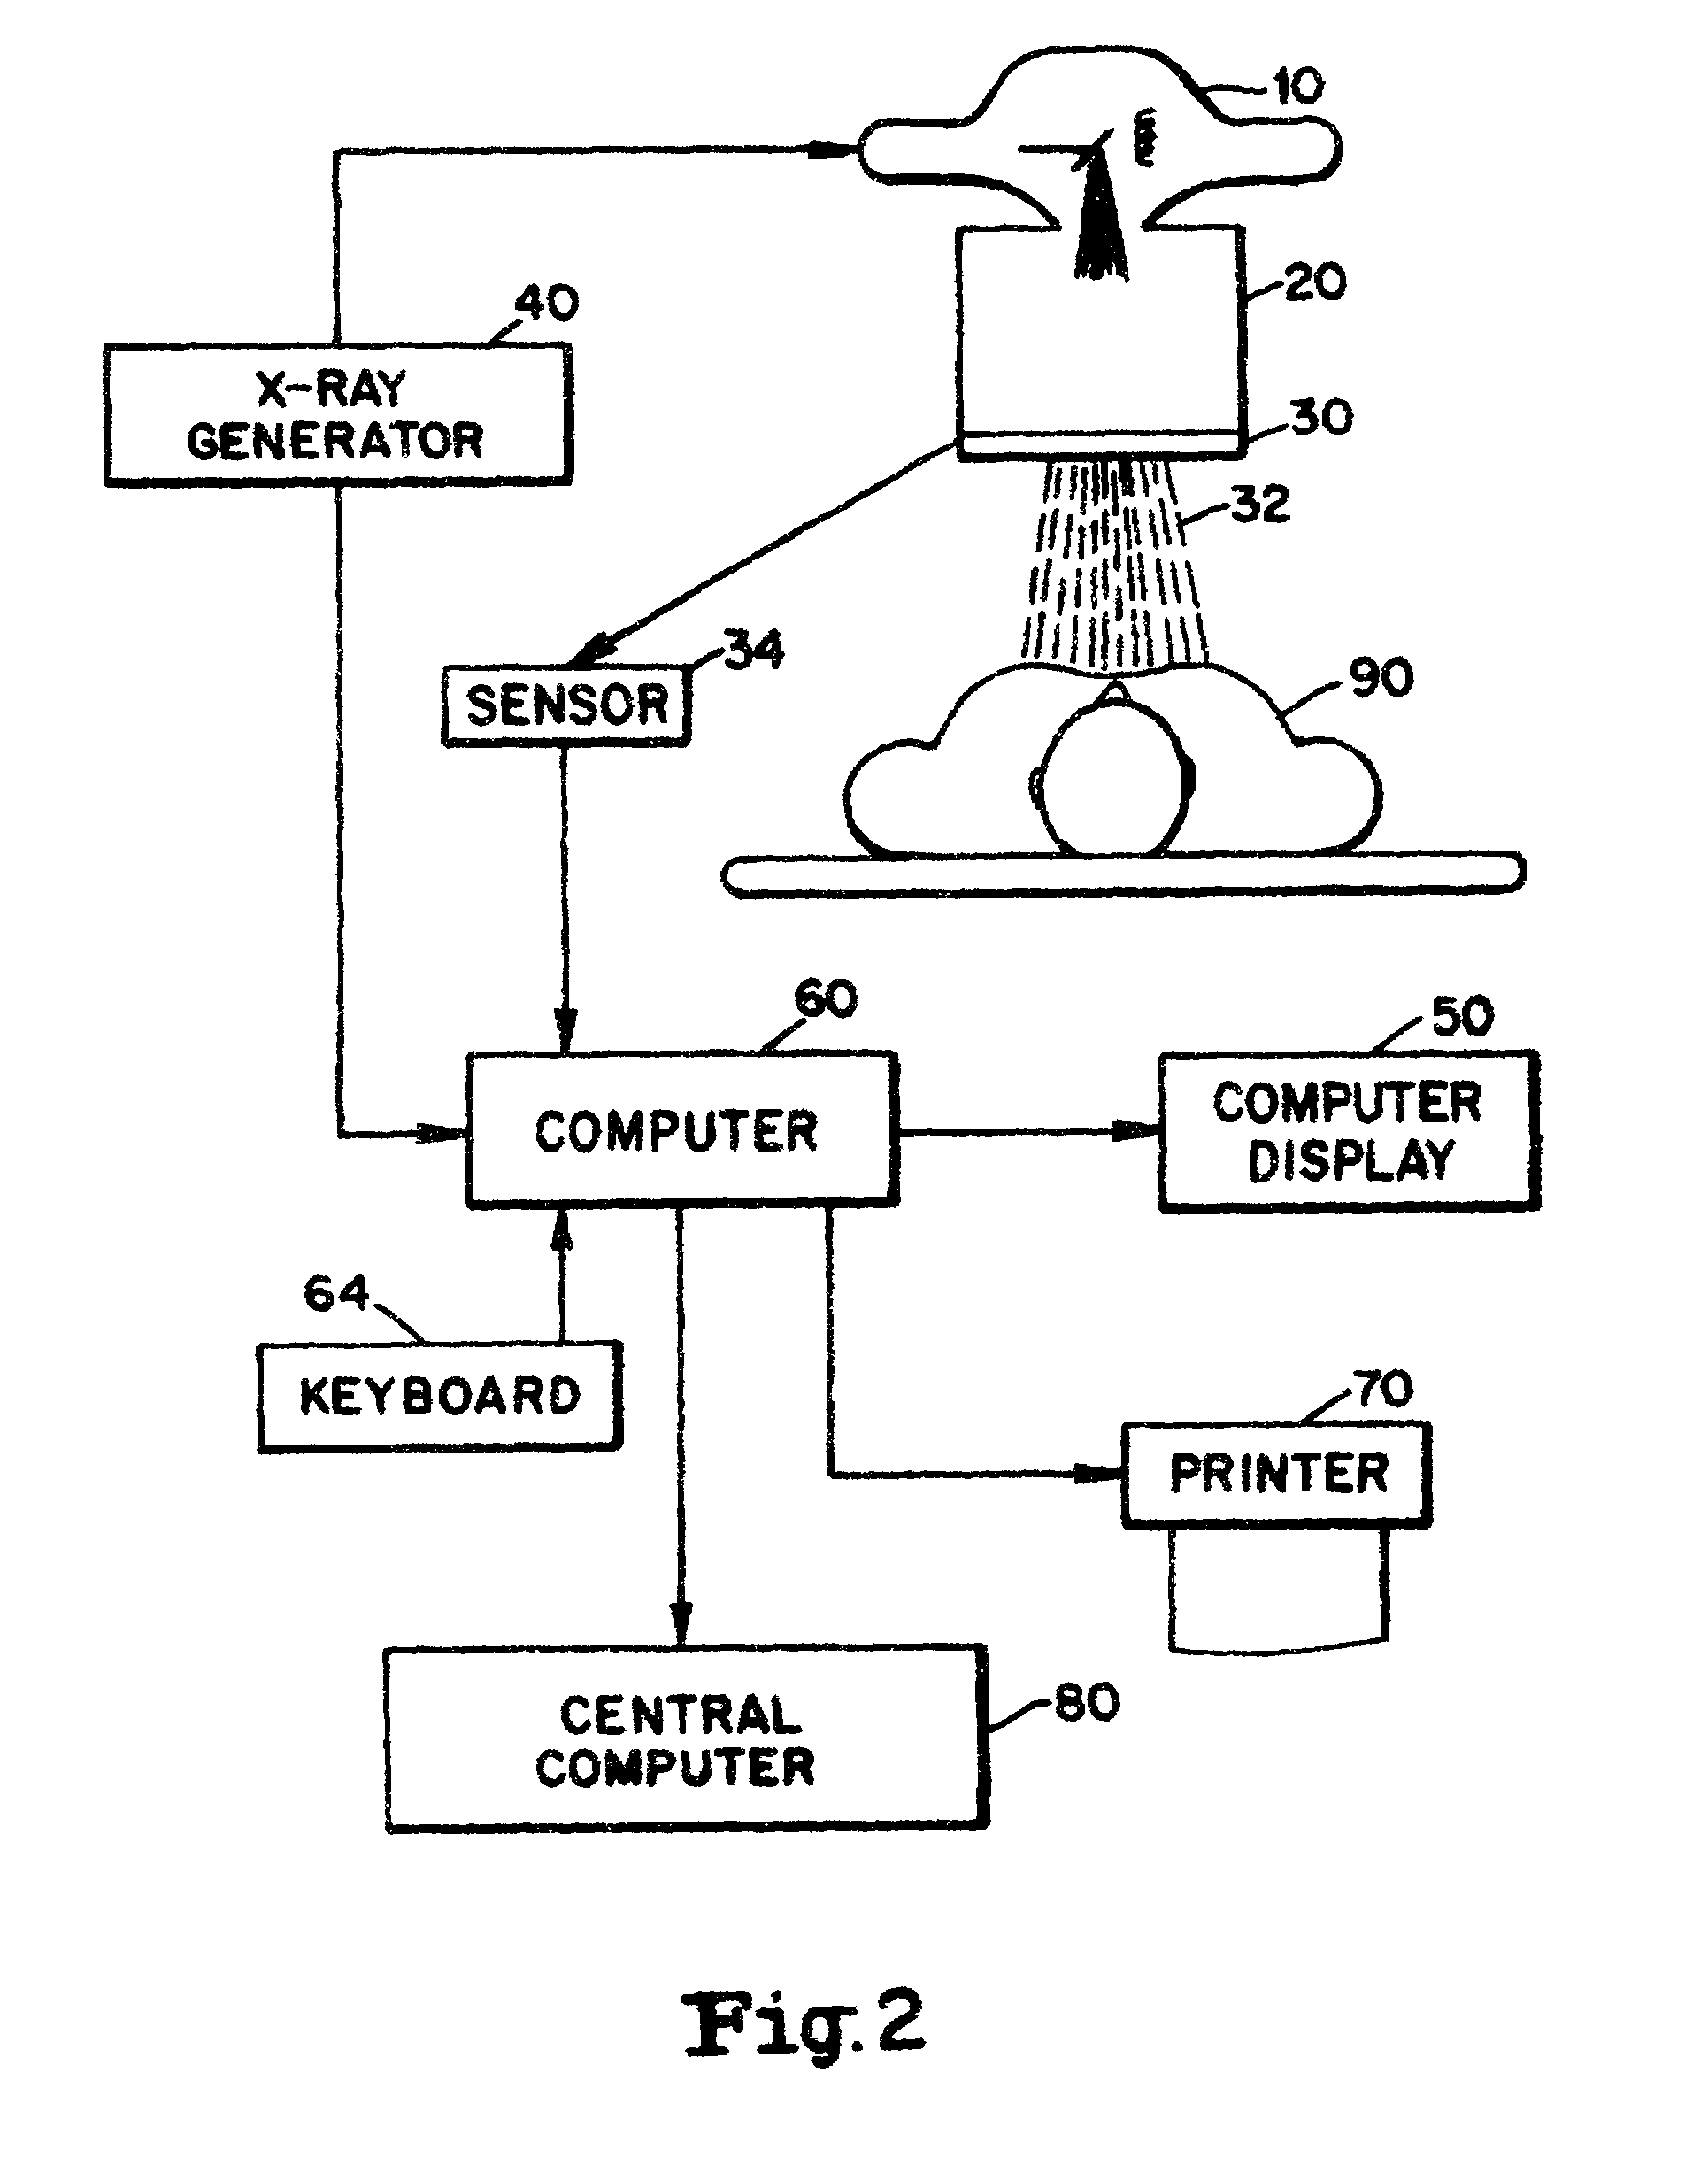 Method for monitoring radiology machines, operators and examinations